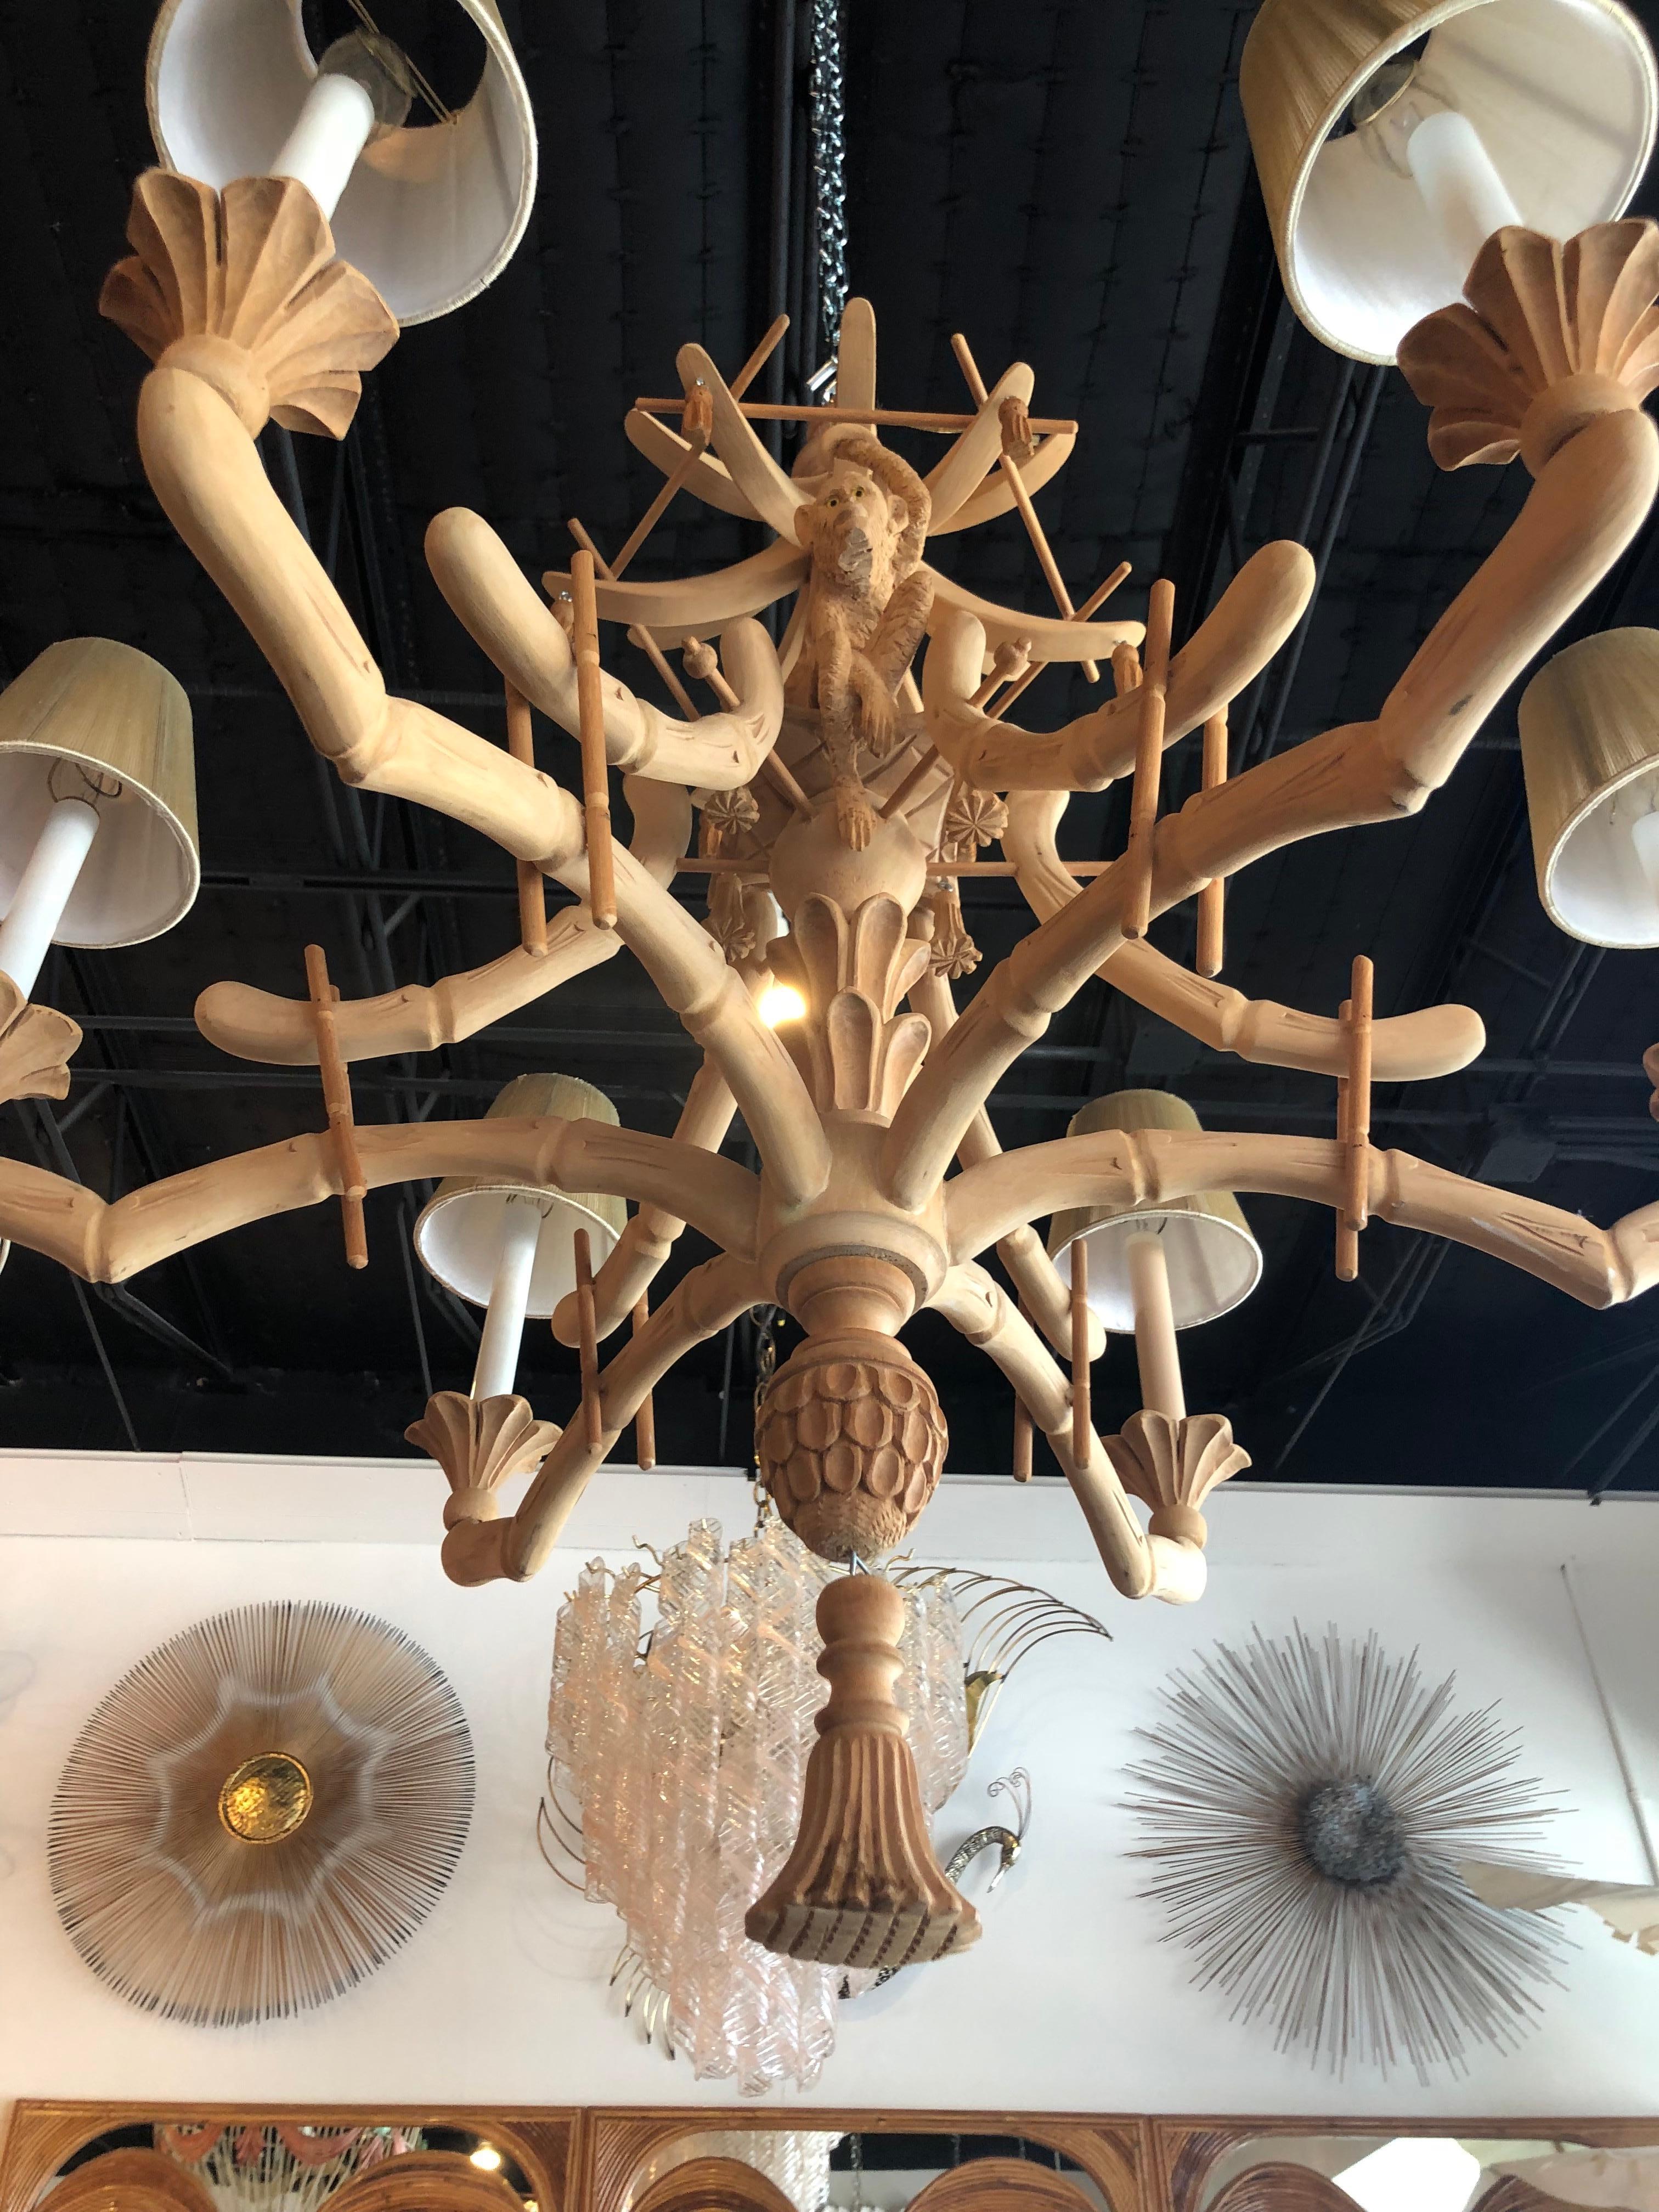 Amazing vintage carved wood monkey 6-light chandelier full of spectacular details, Pagoda top, bells, tassels, carved leaves, faux bamboo just to name a few! Original natural wood makes this perfect for a tropical Palm Beach feel! Candelabra covers